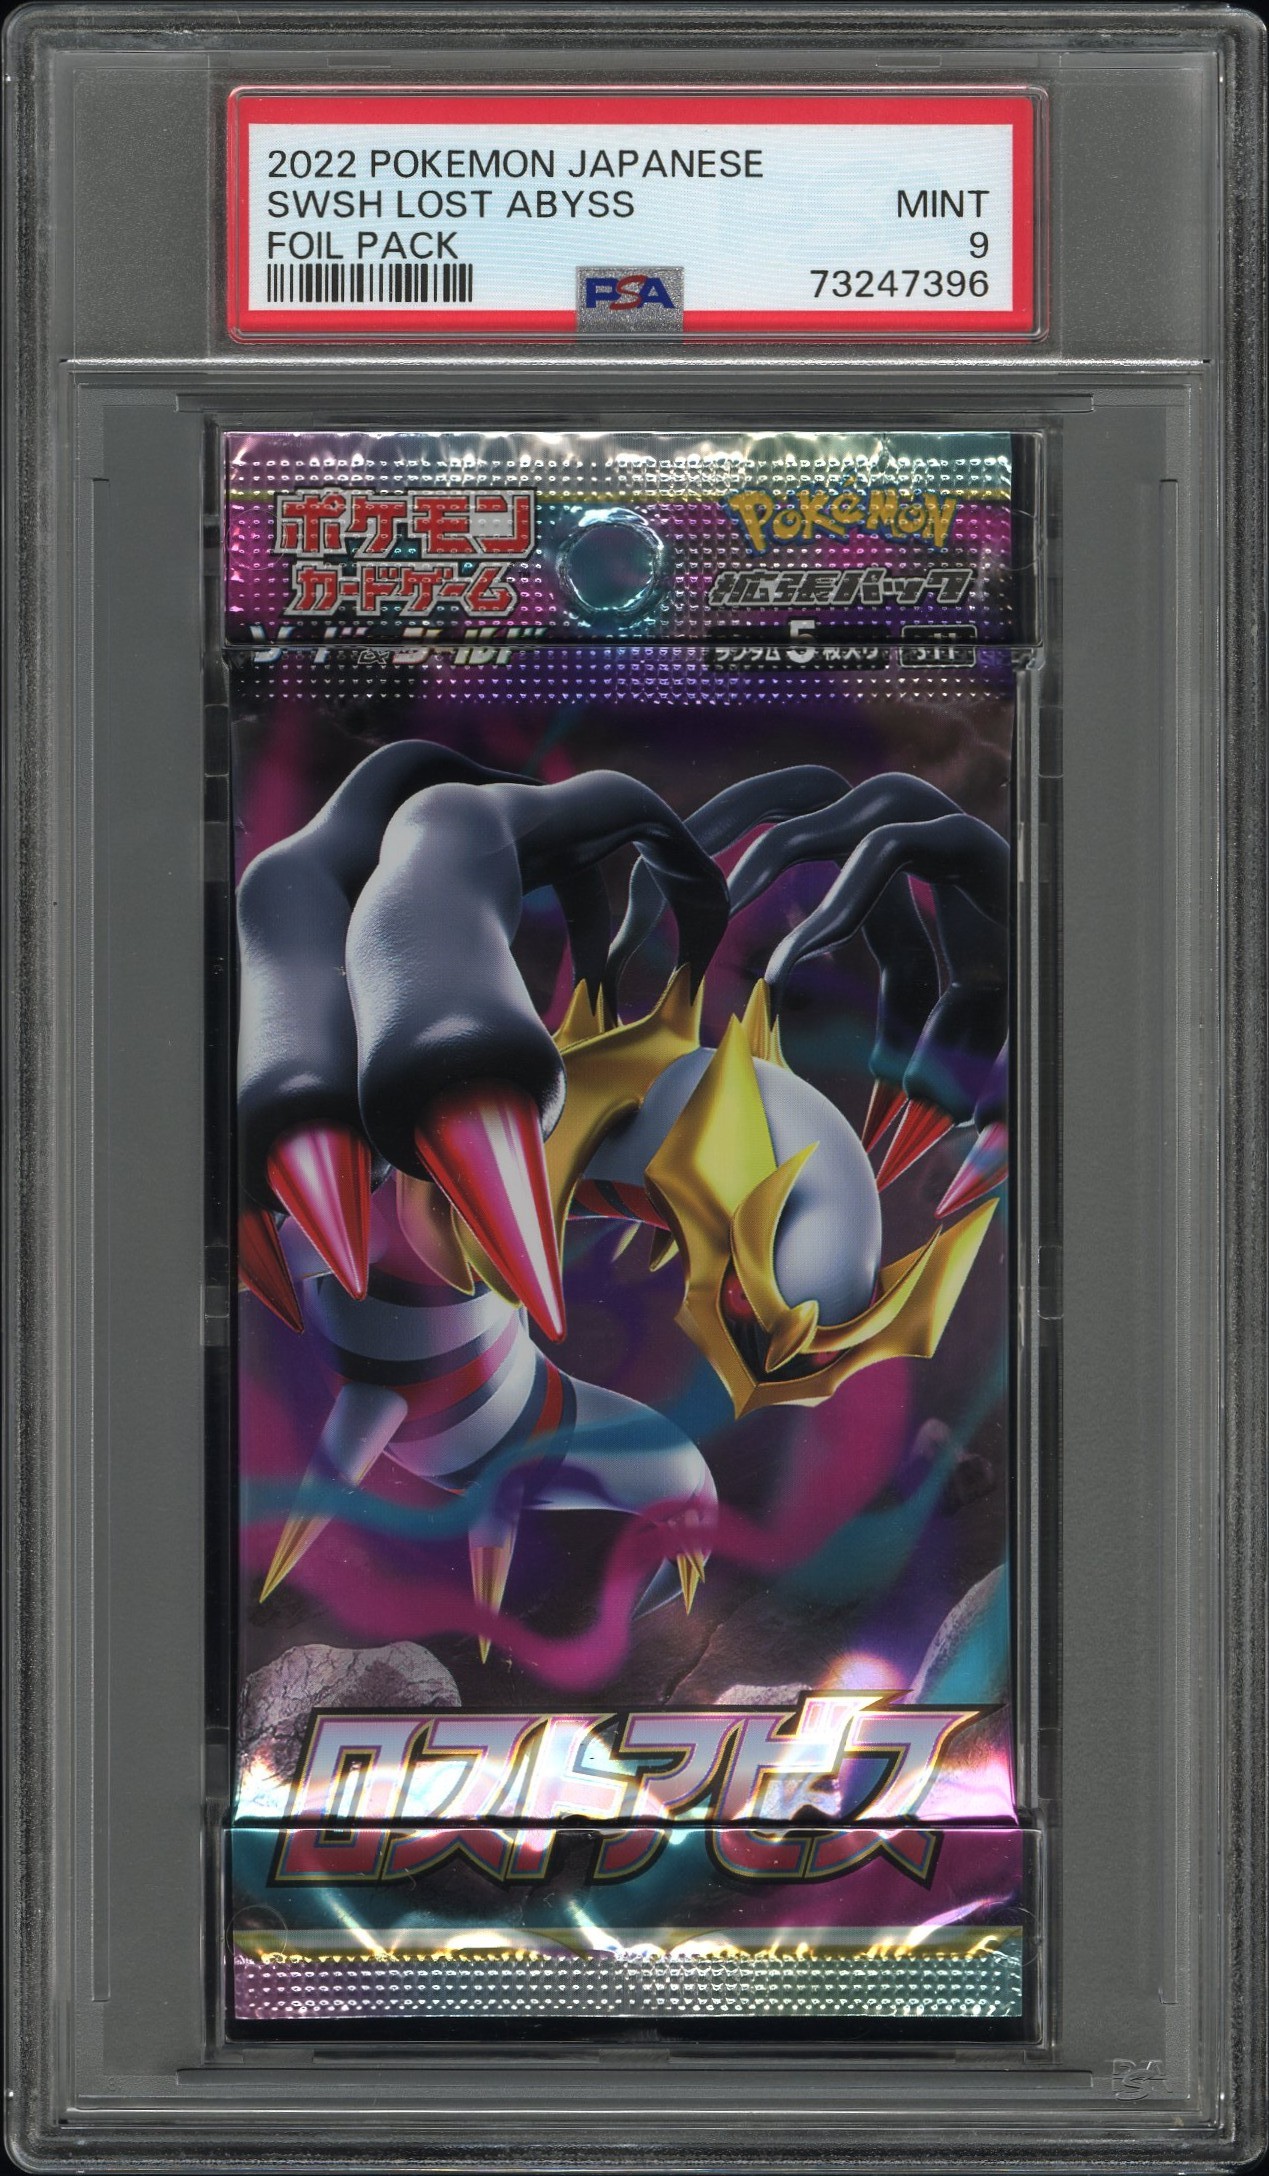 COSMOG 014 PSA 10 POKEMON JAPANESE 25TH ANNIVERSARY COLLECTION – Psydeck